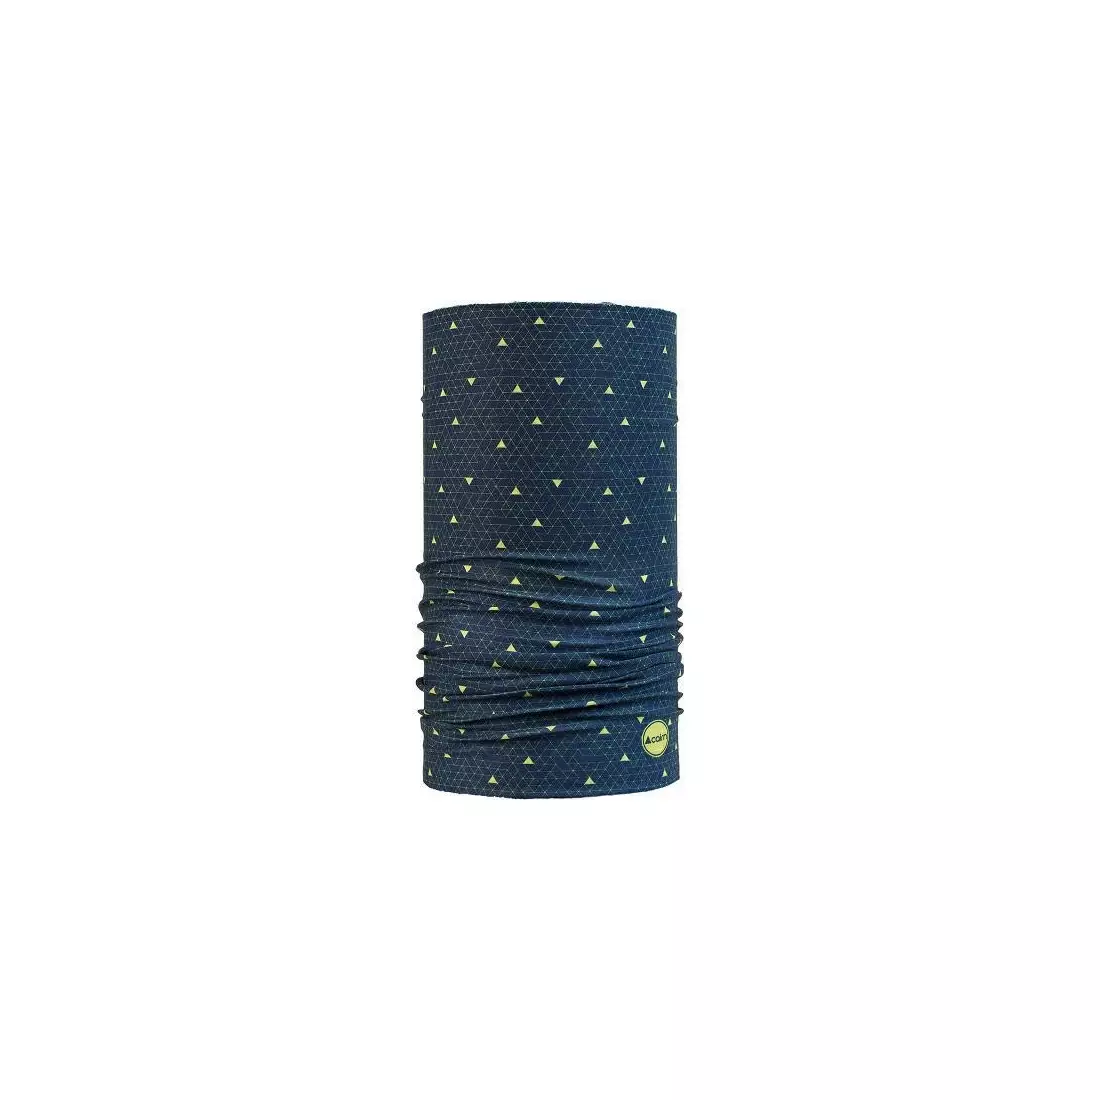 CAIRN Multifunctional scarf MALAWI TUBE navy blue yellow